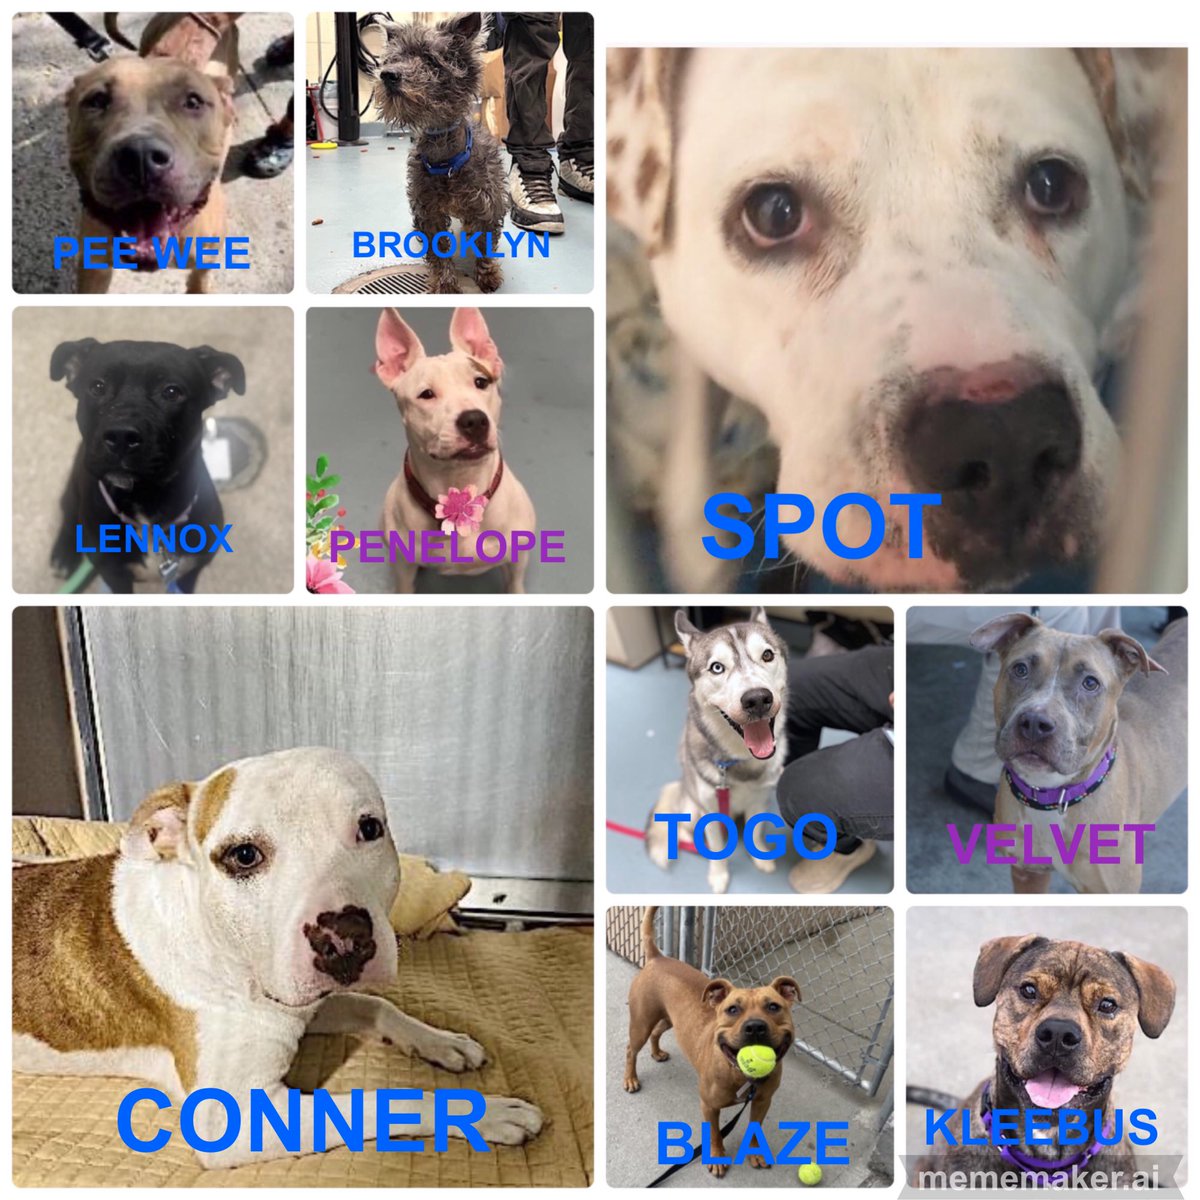 #NYCACC 
10 Kill Commands
9/23
#AutumnalEquinox 

10 precious beings 
Their eyes filled with hope, dread or love
Some have faith we will save them, their loyalty unwavering
Some crushed by abandonment, neglect & abuse
But they still dream of safety & security

#FostersSaveLives